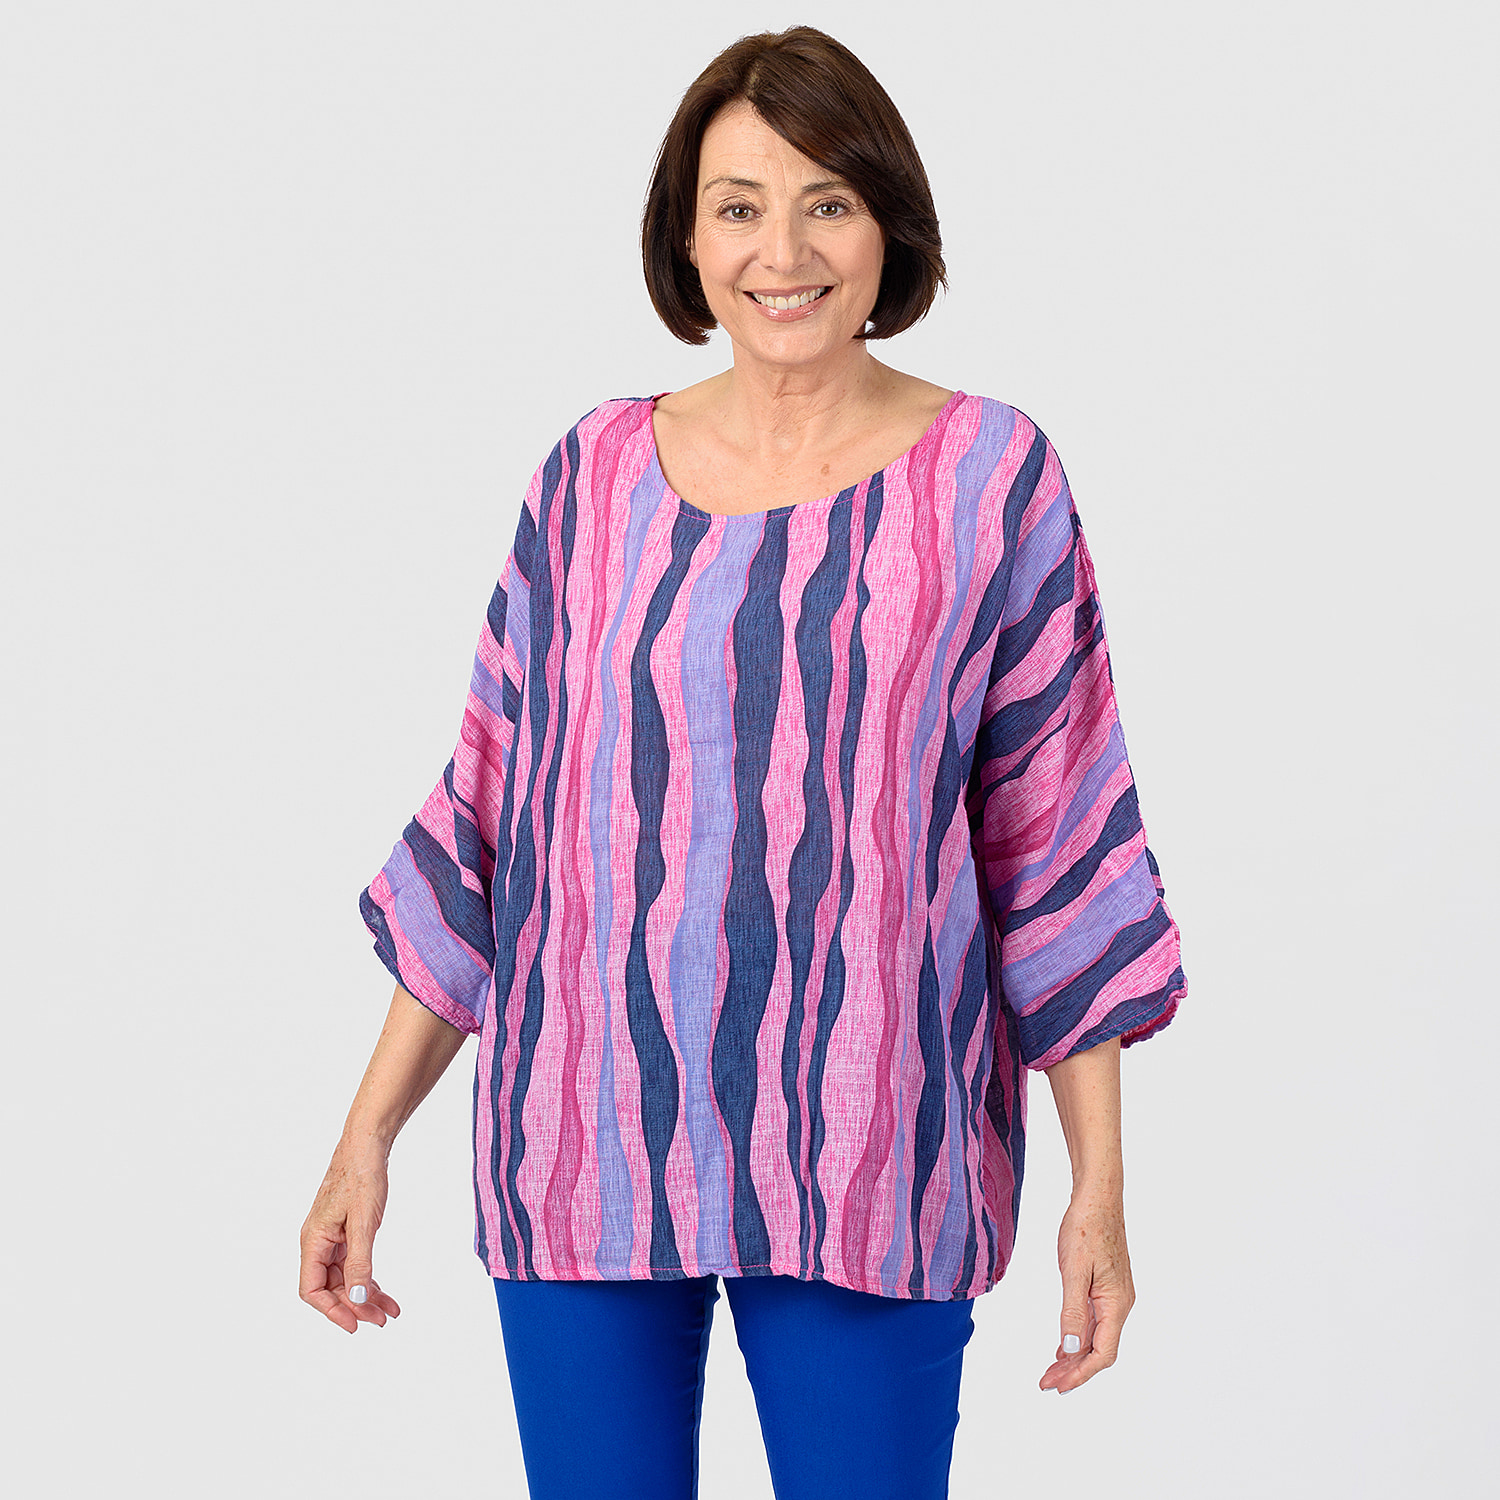 Mudflower 100% Cotton Abstract Stripe Top (One Size,8-18) - Pink